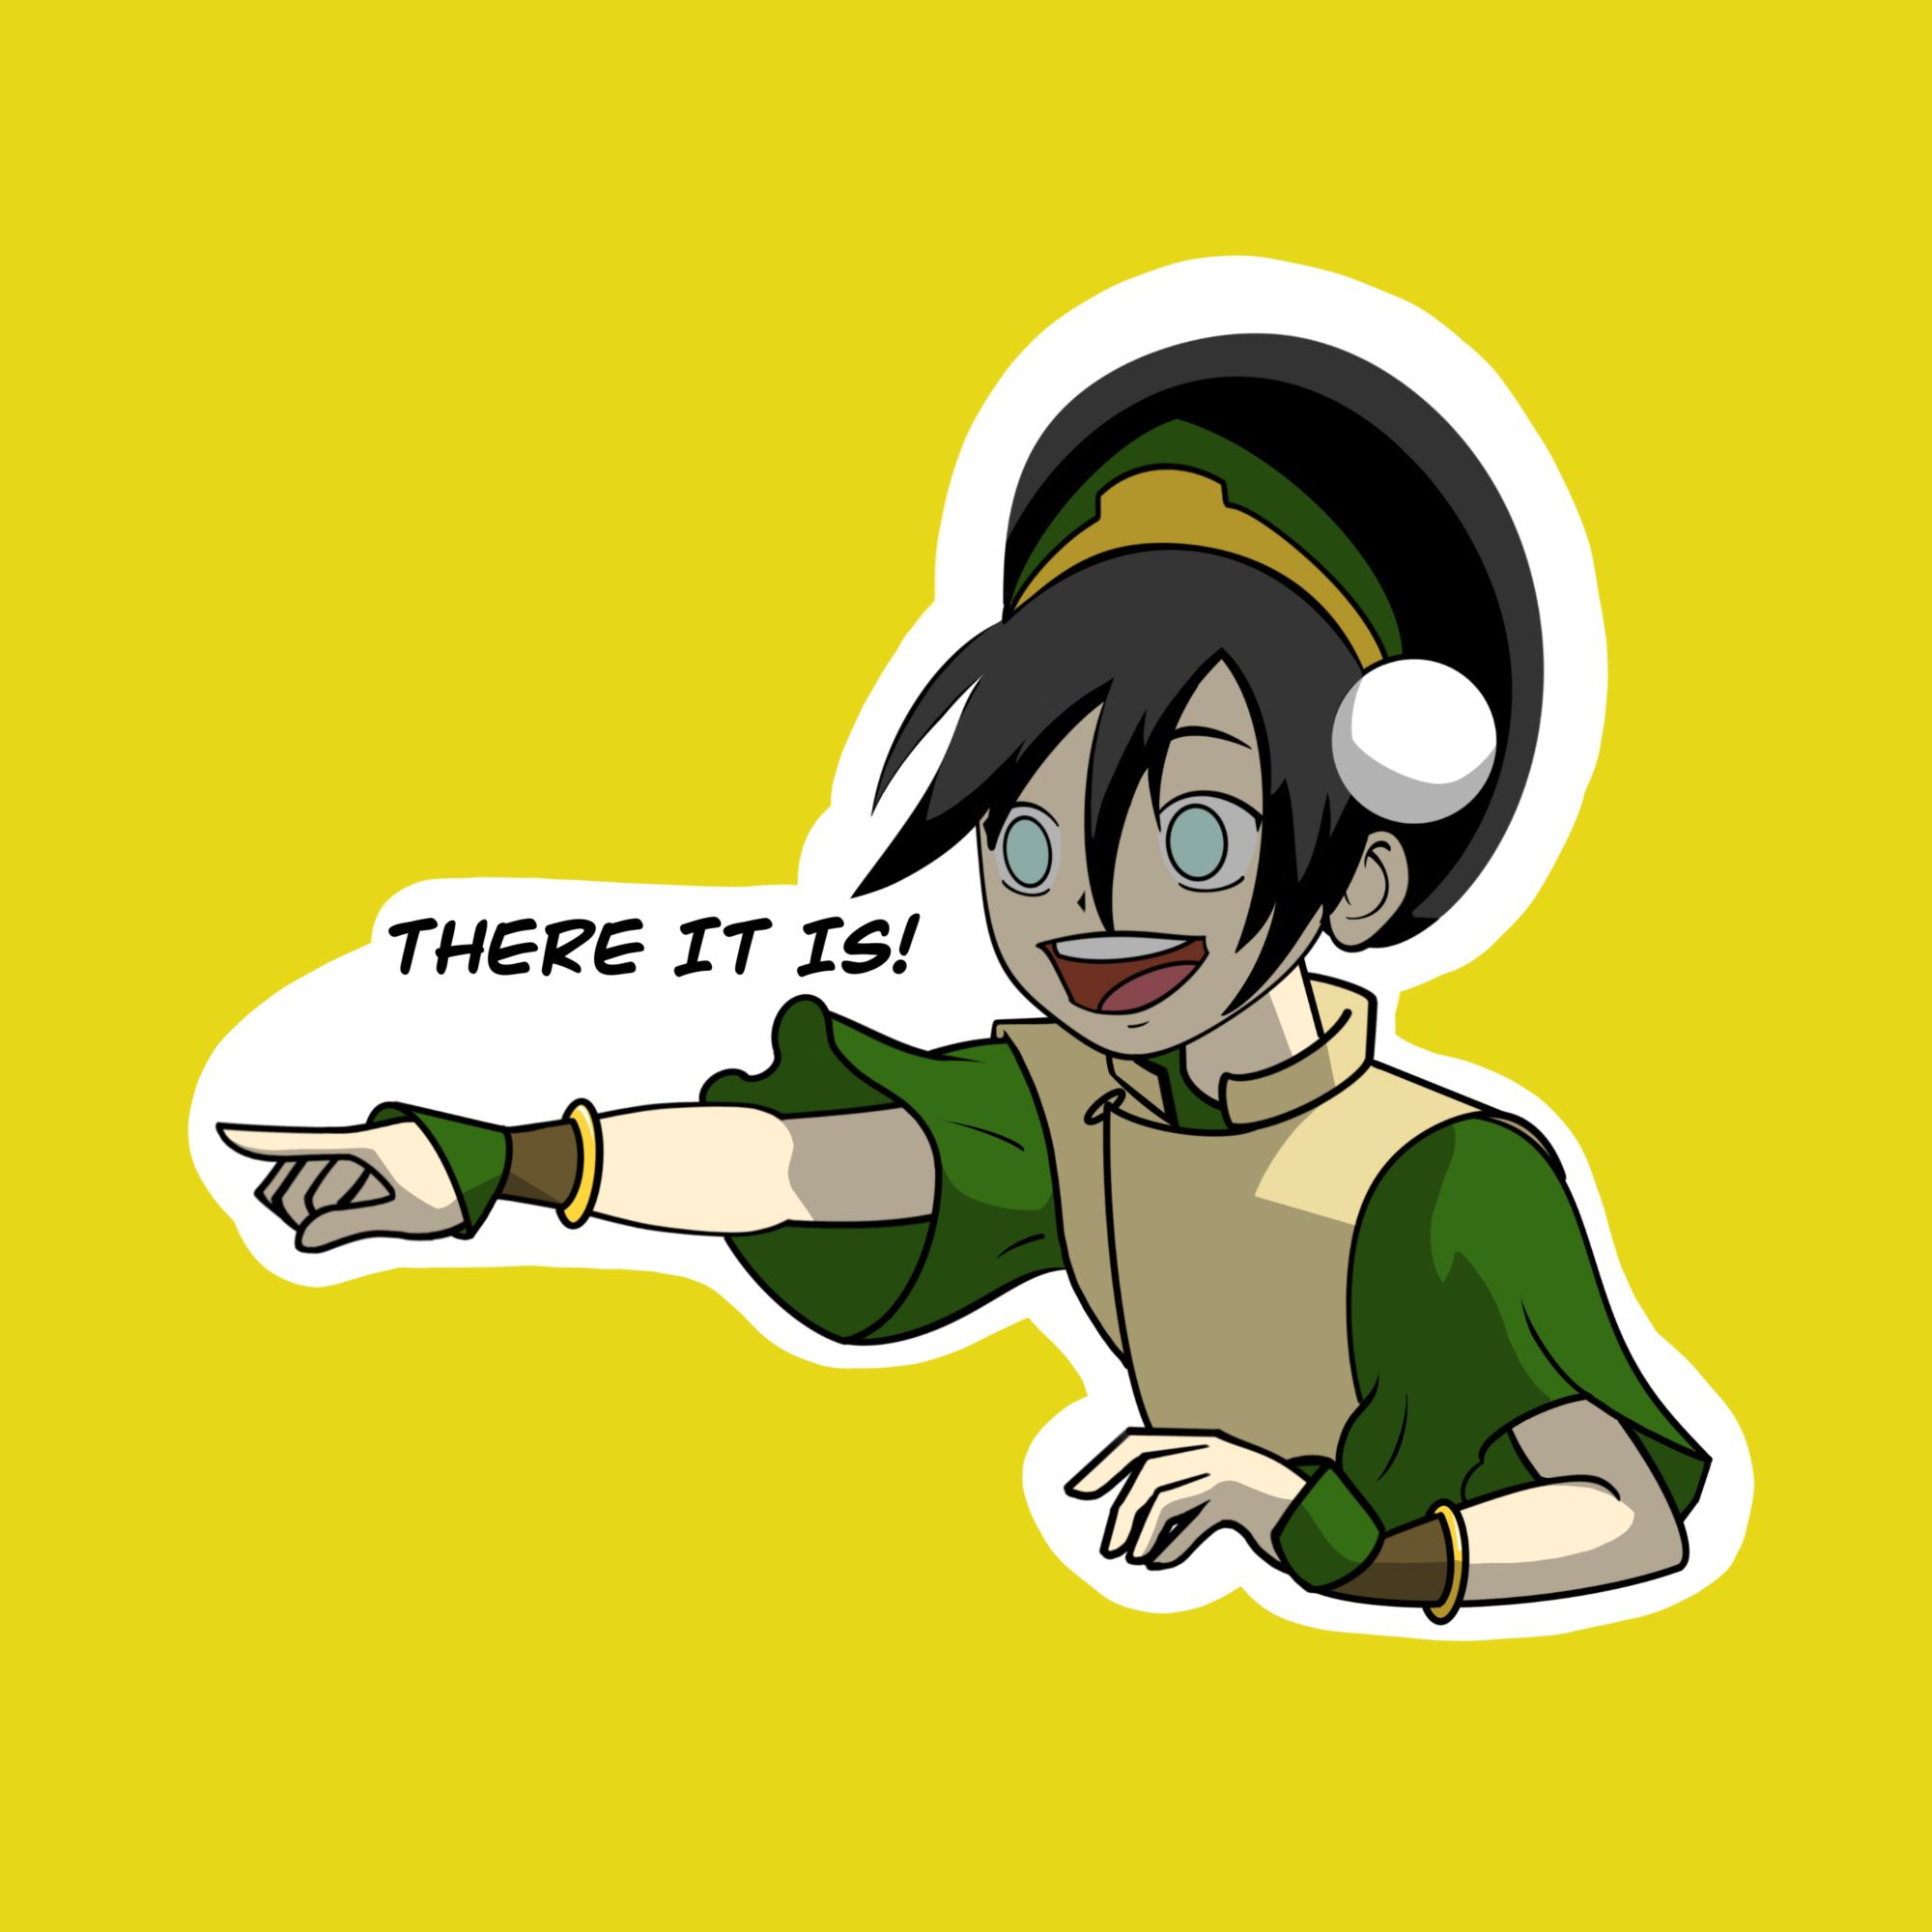 There it is sticker. Etsy. Avatar the last airbender art, Avatar legend of aang, Avatar